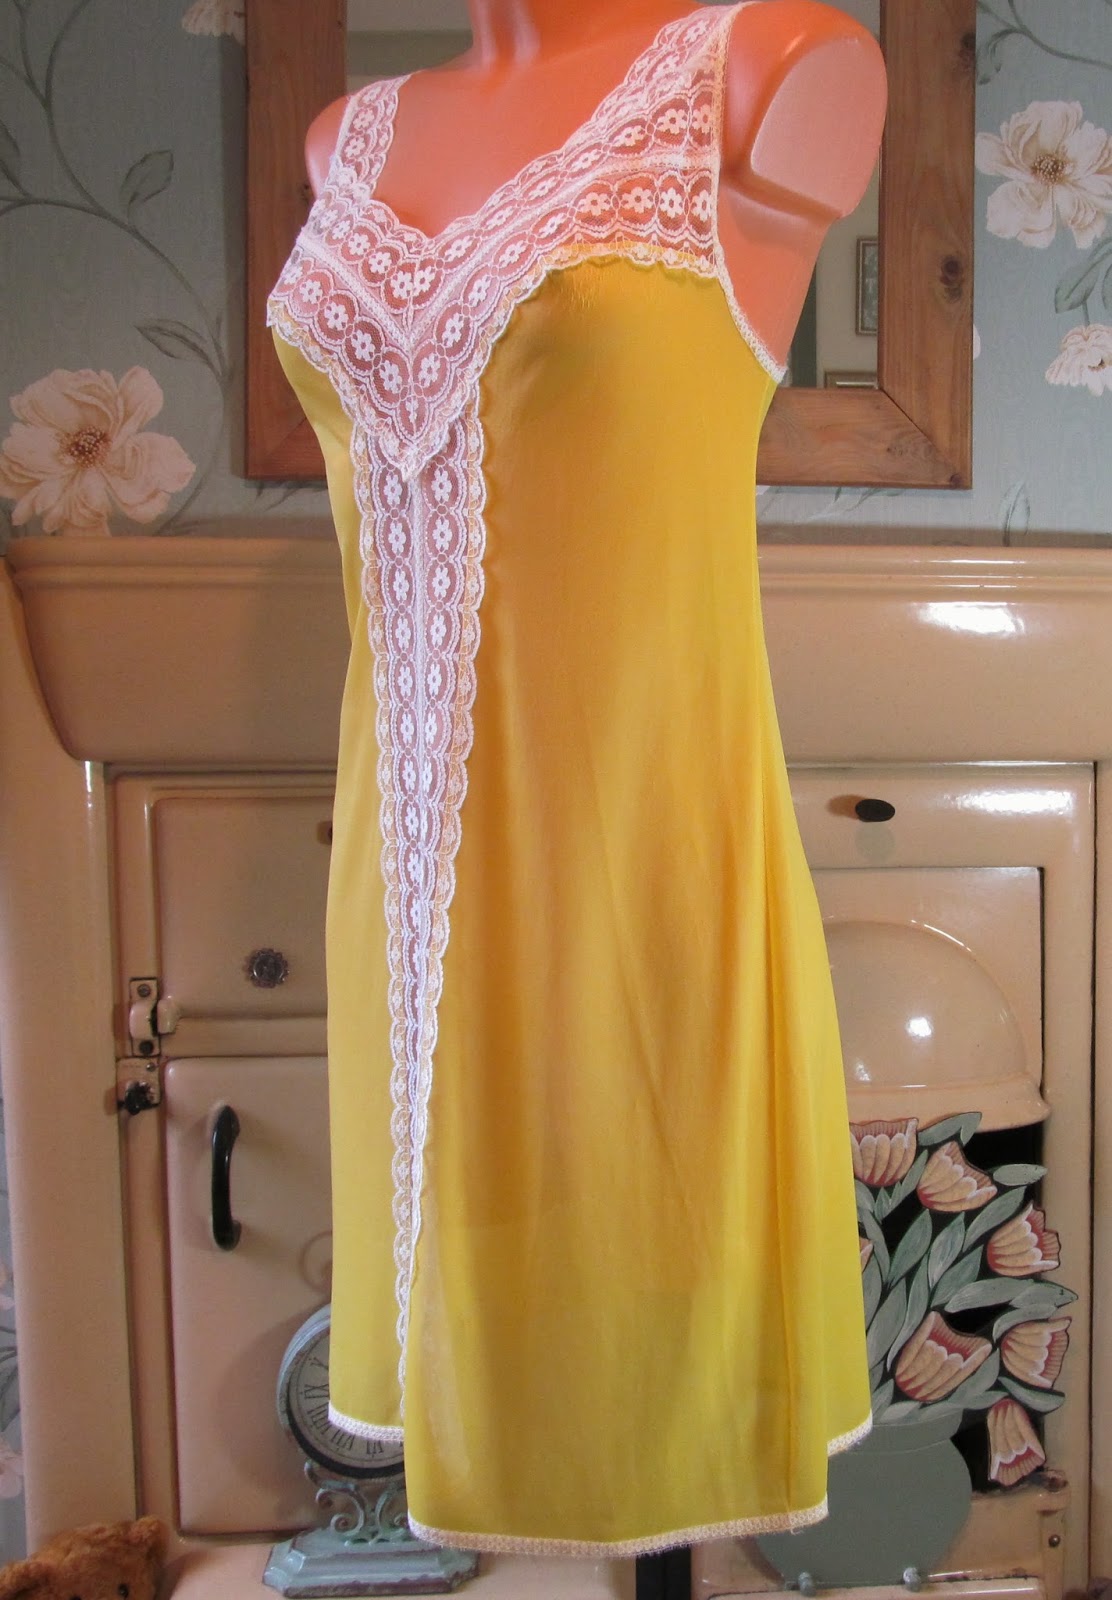 Vintage Yellow White With Lace Soft Slippy Nylon Full Slip Nightie Gown S M R11981